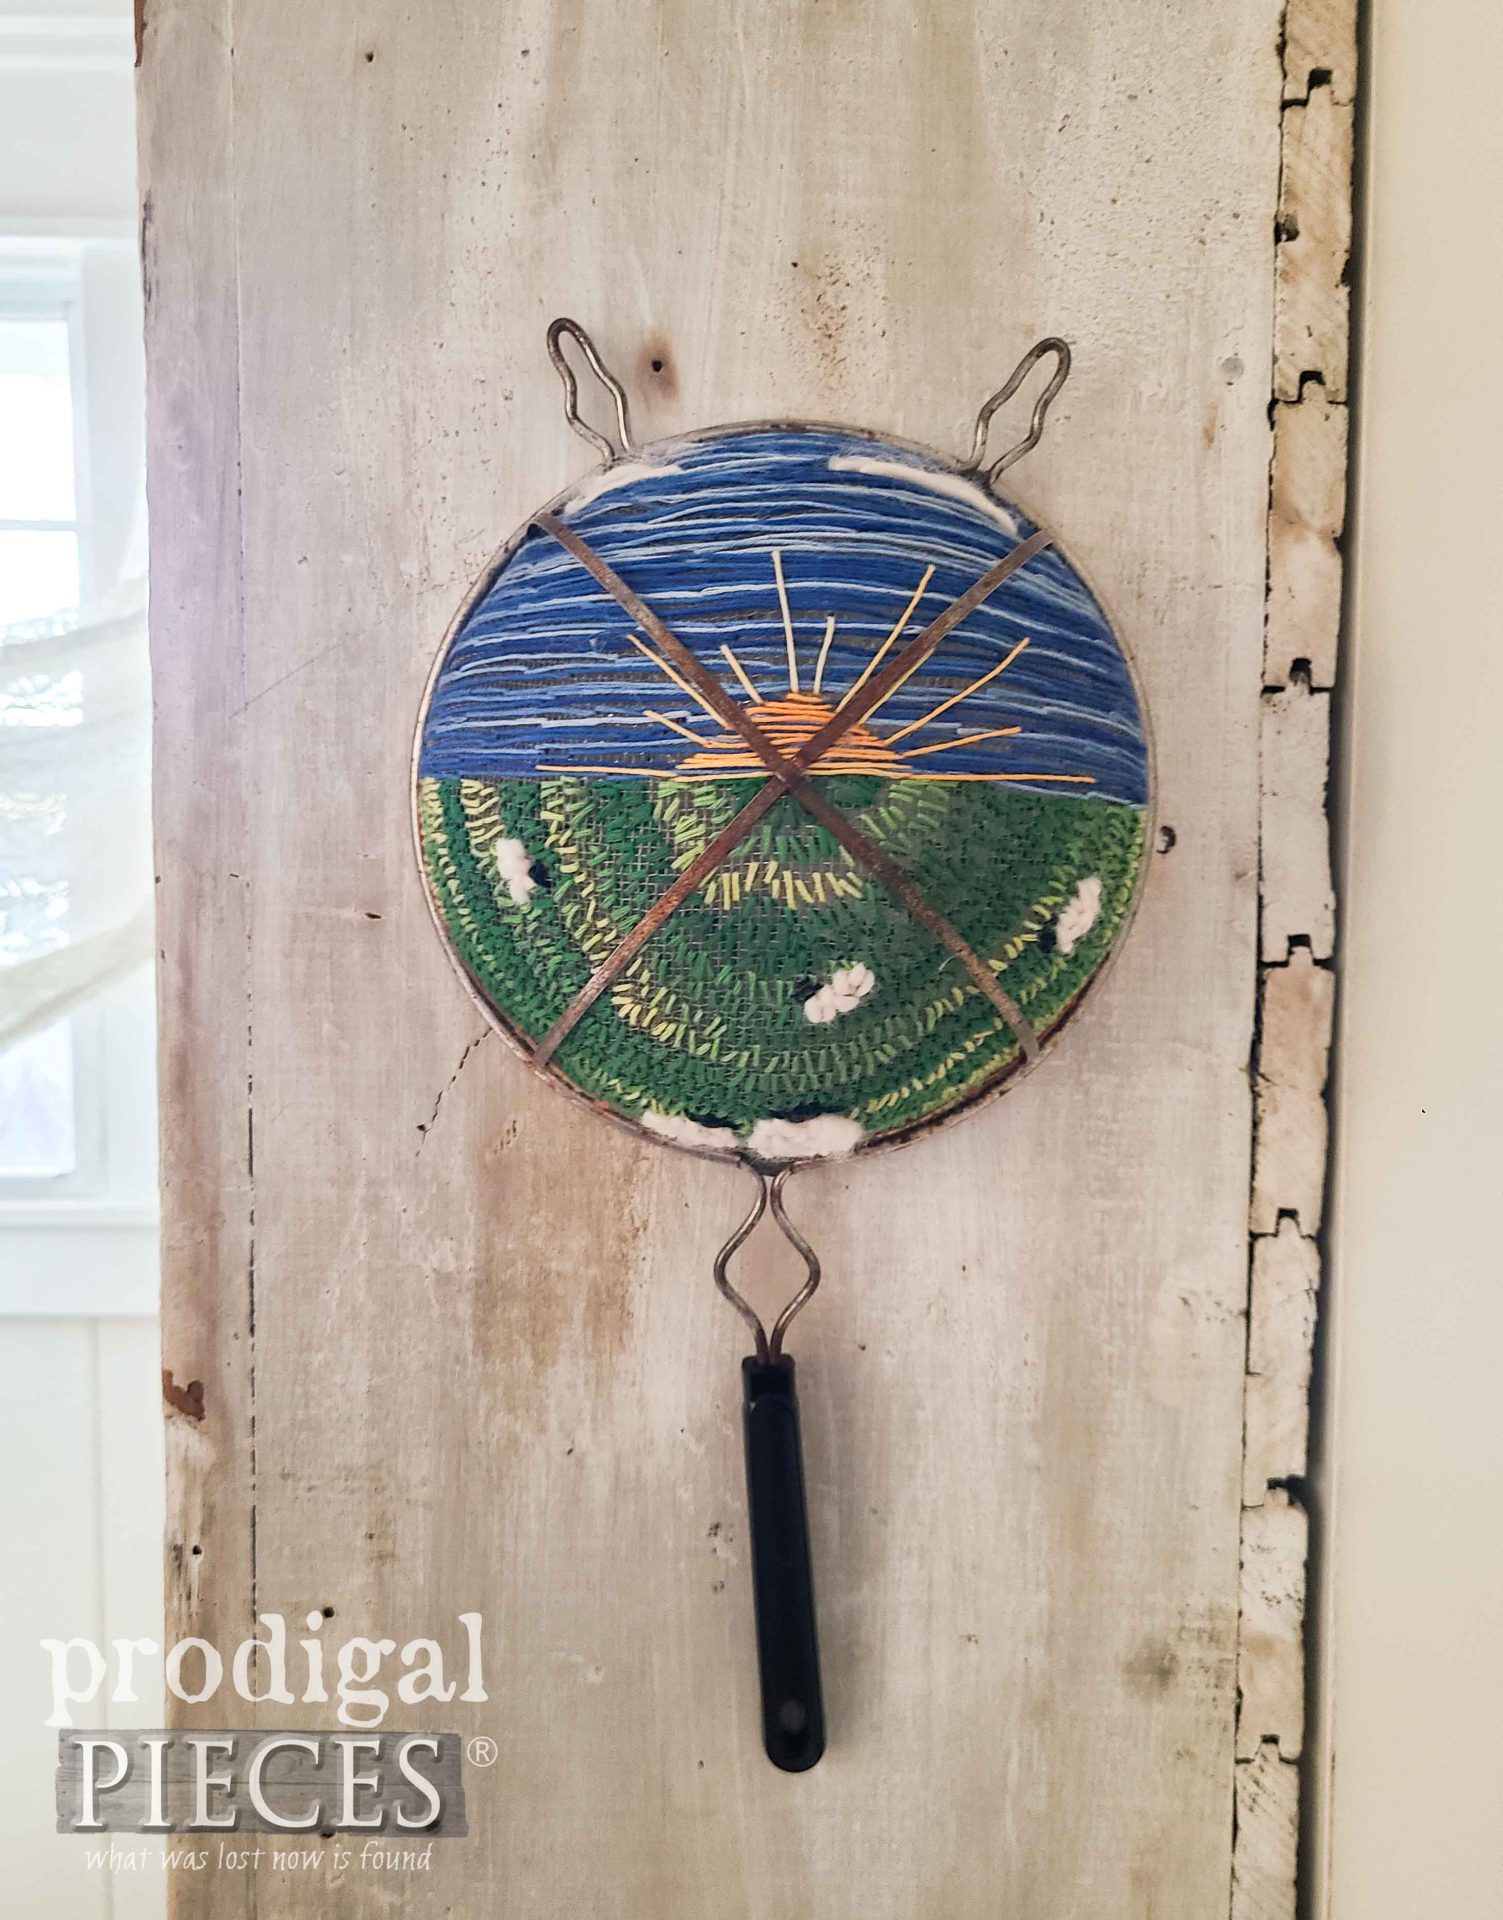 DIY Farmhouse Embroidered Strainer Art "Focus on the Son" by Larissa of Prodigal Pieces | prodigalpieces.com #prodigalpieces #diy #crafts #art #upcycled